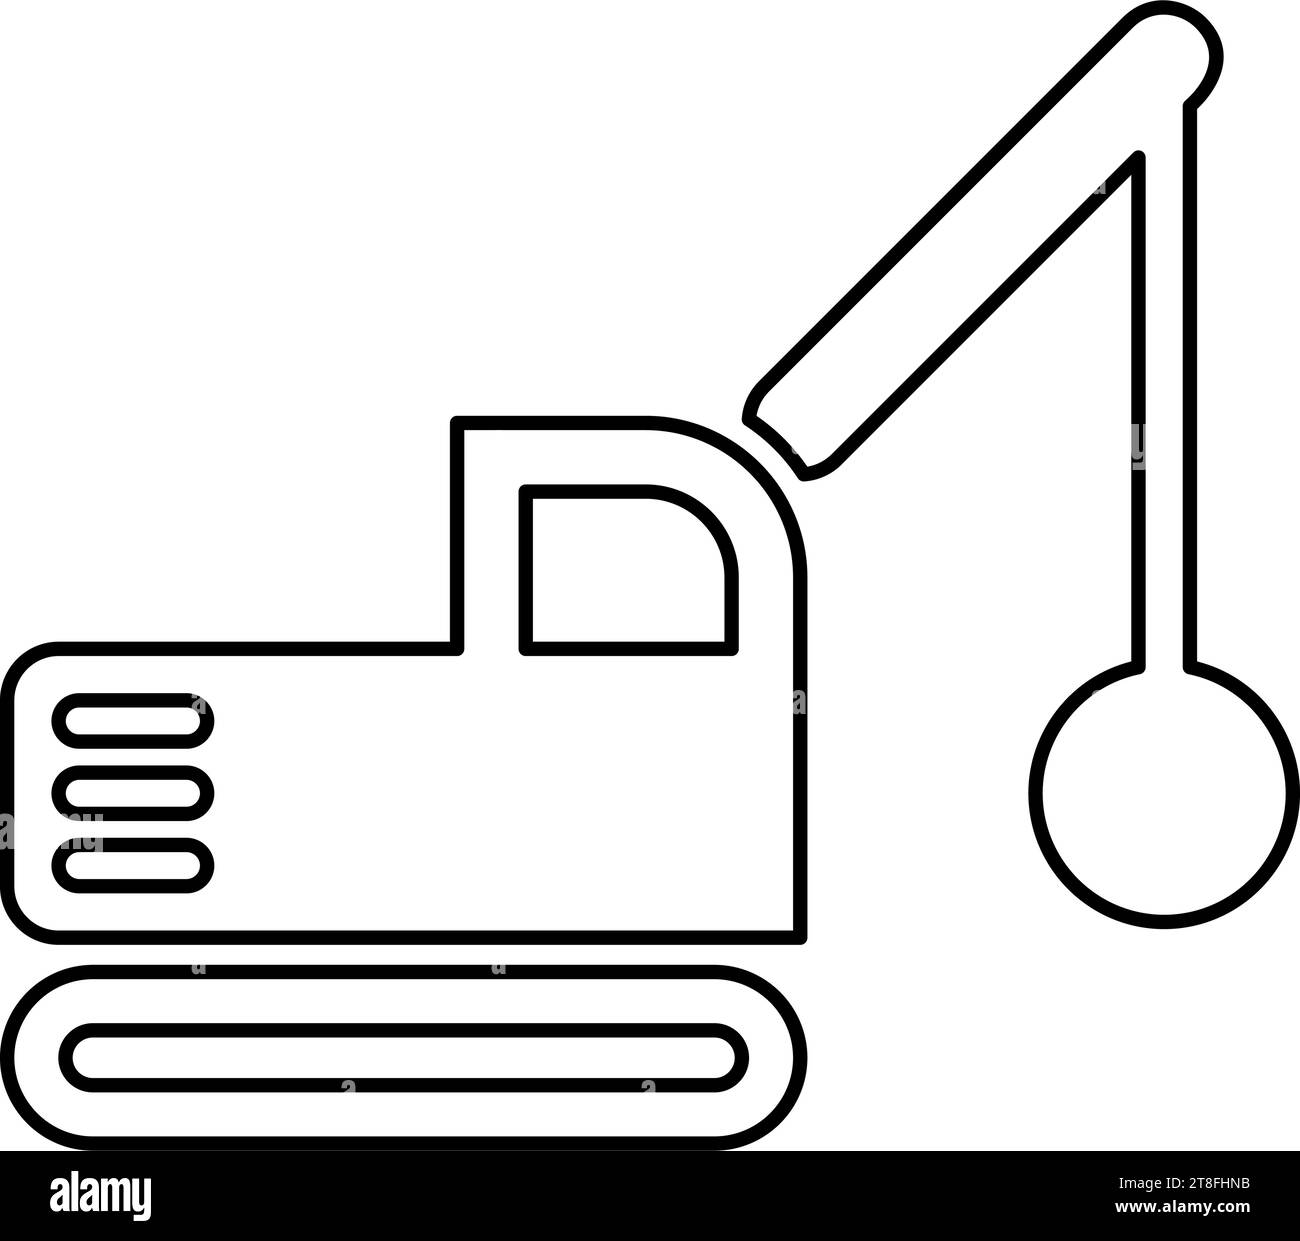 Sloopkraan building machine demolish wrecking ball crane truck contour outline line icon black color vector illustration image thin flat style simple Stock Vector